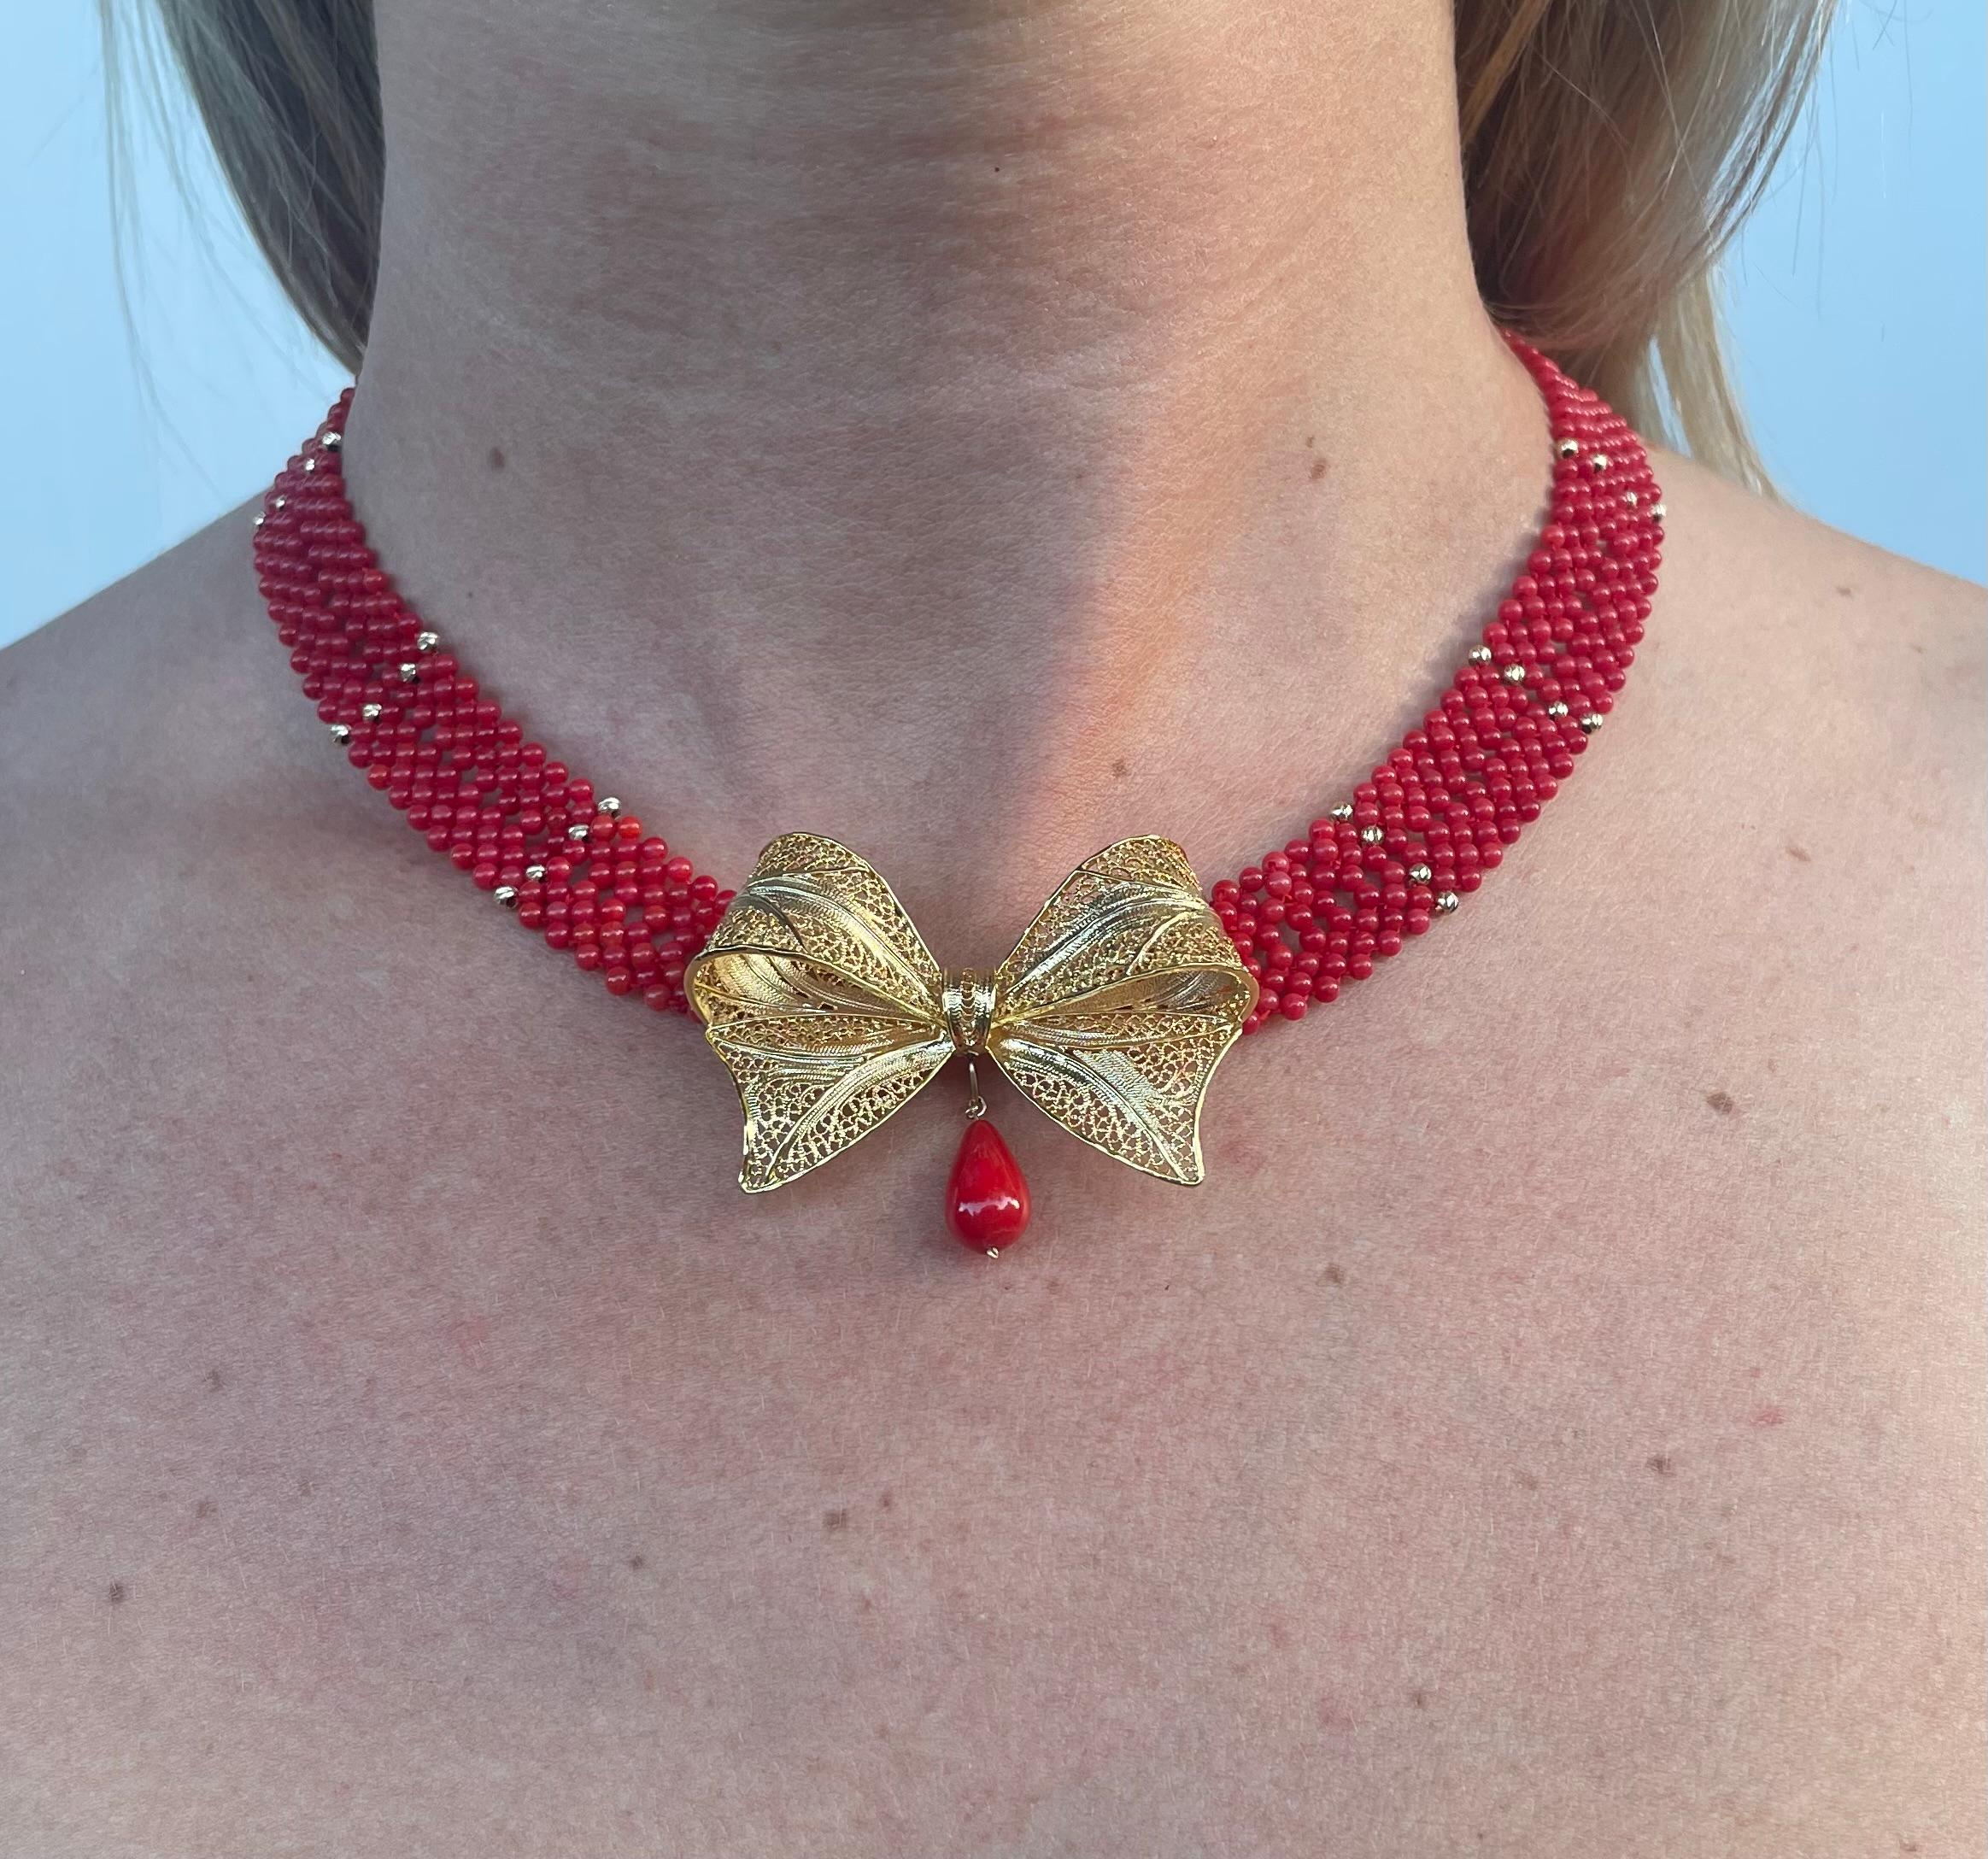 Artisan Marina J Coral Woven Necklace with 18k Plated Bowtie Centerpiece & Detailings For Sale